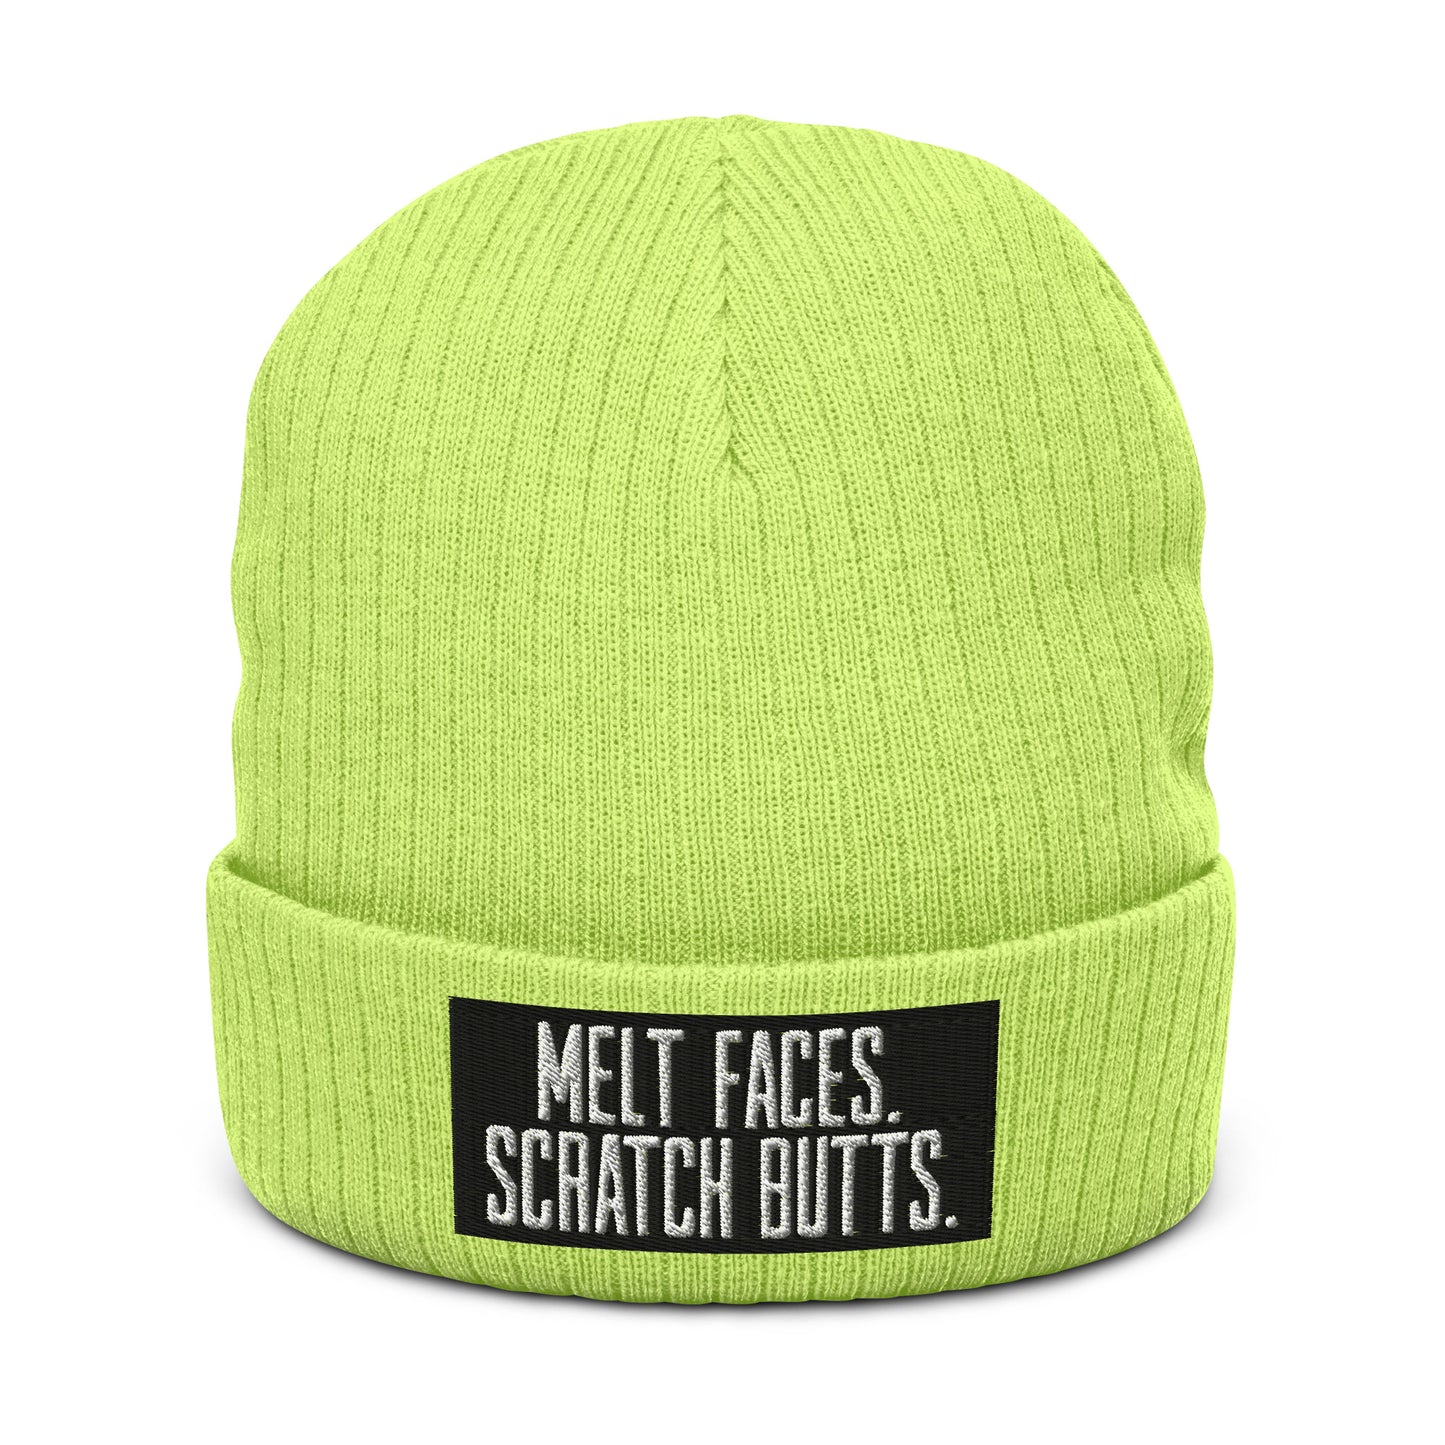 Melt Faces Scratch Butts Recycled Beanie